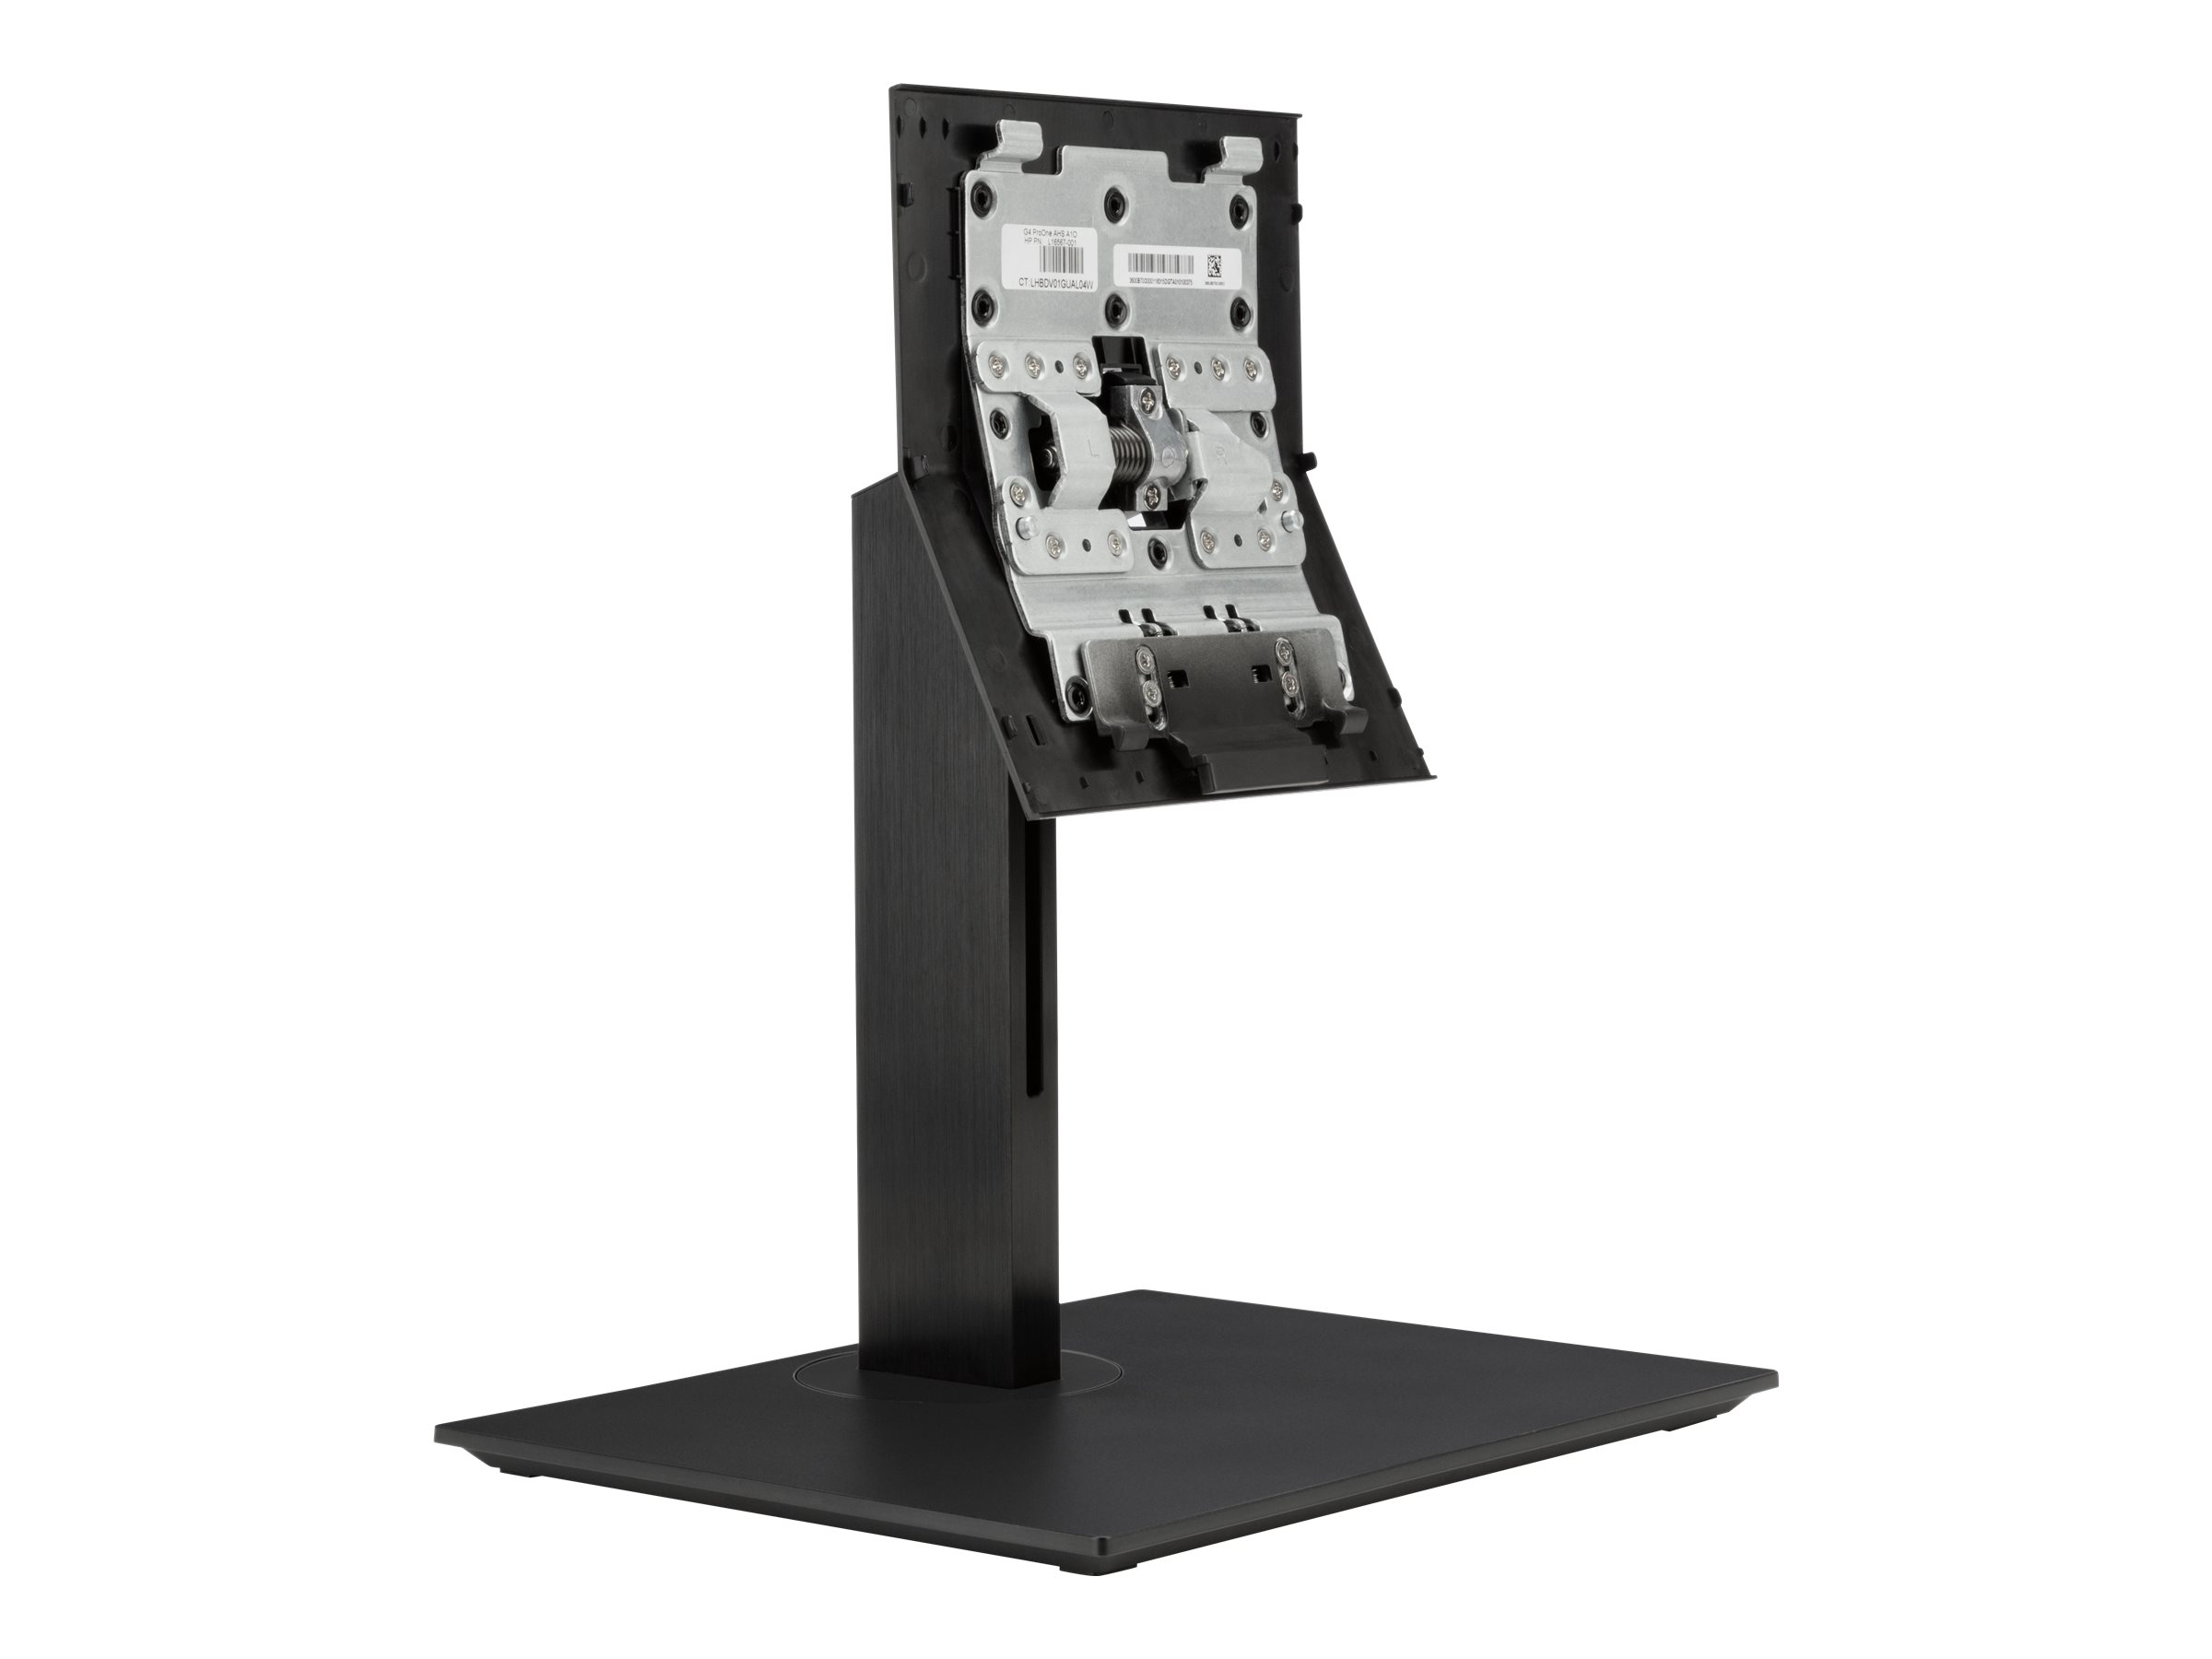 HP Adjustable Height Stand - All-in-One Stnder - fr ProOne 400 G4, 440 G4, 600 G4